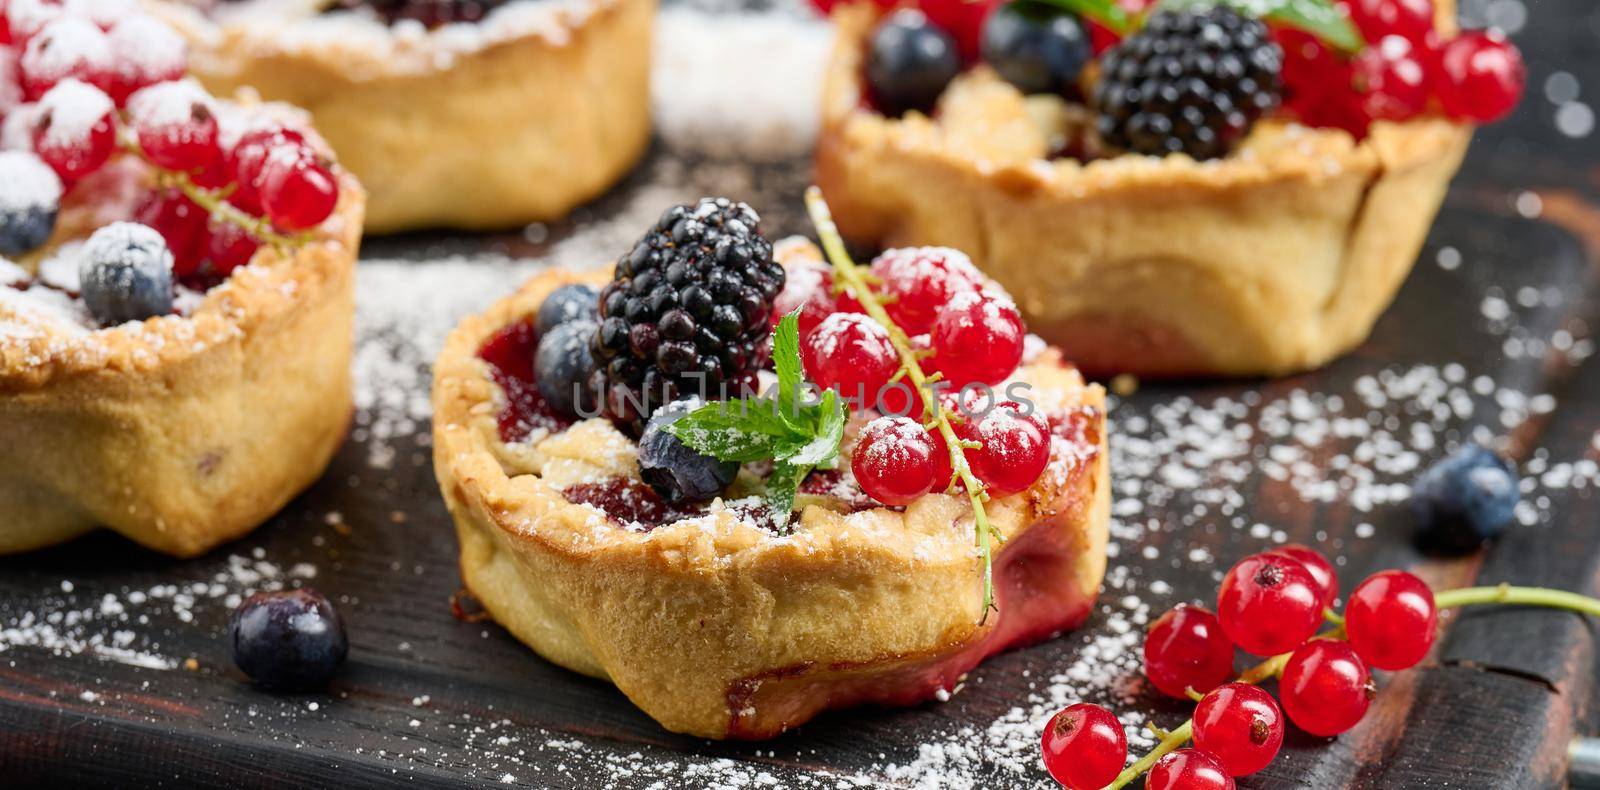 Fruit tart with red currants sprinkled with powdered sugar on a black table